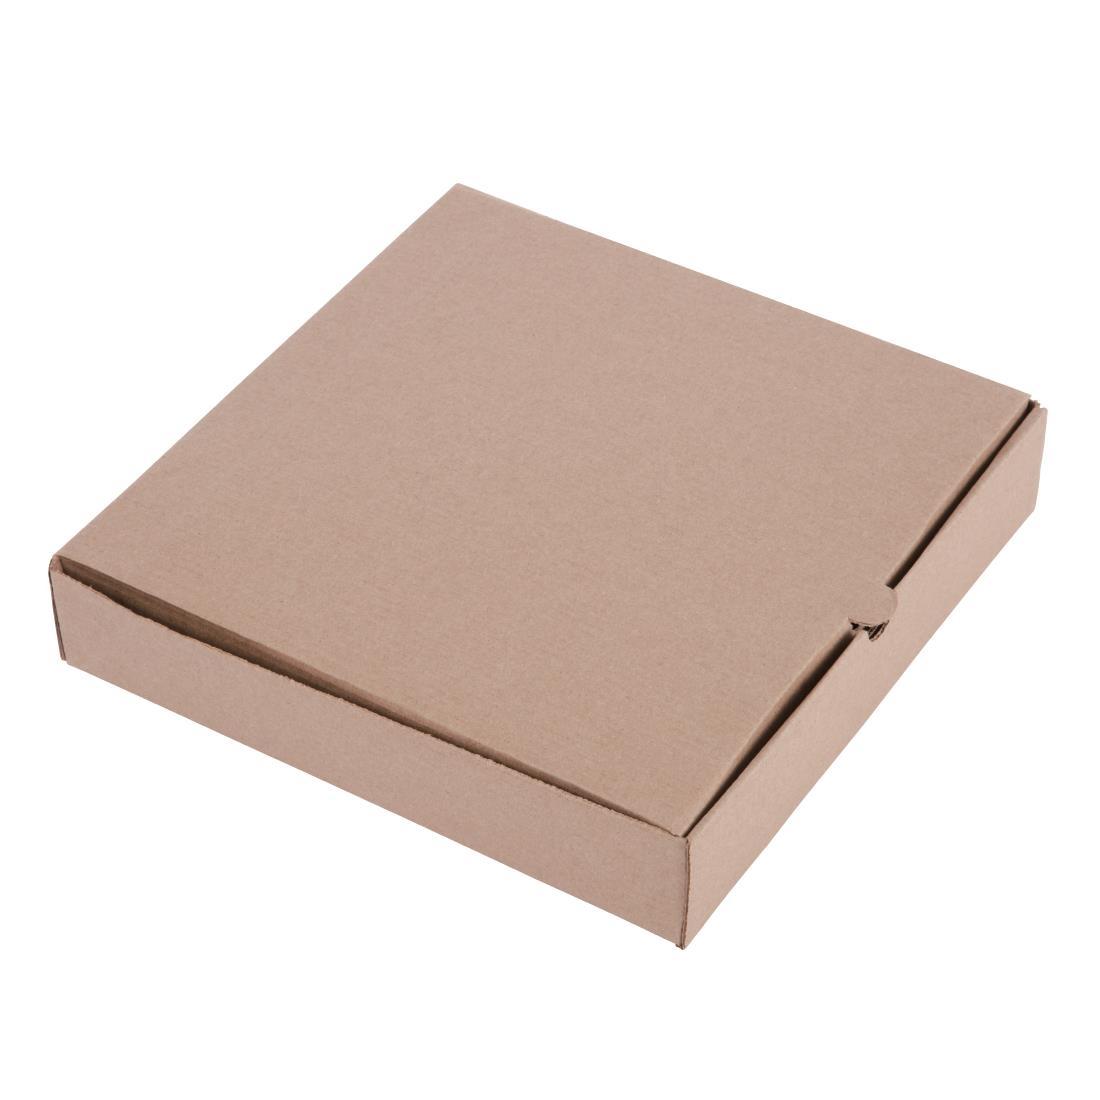 Fiesta Compostable Plain Pizza Boxes 9" (Pack of 100) - DC723  - 1